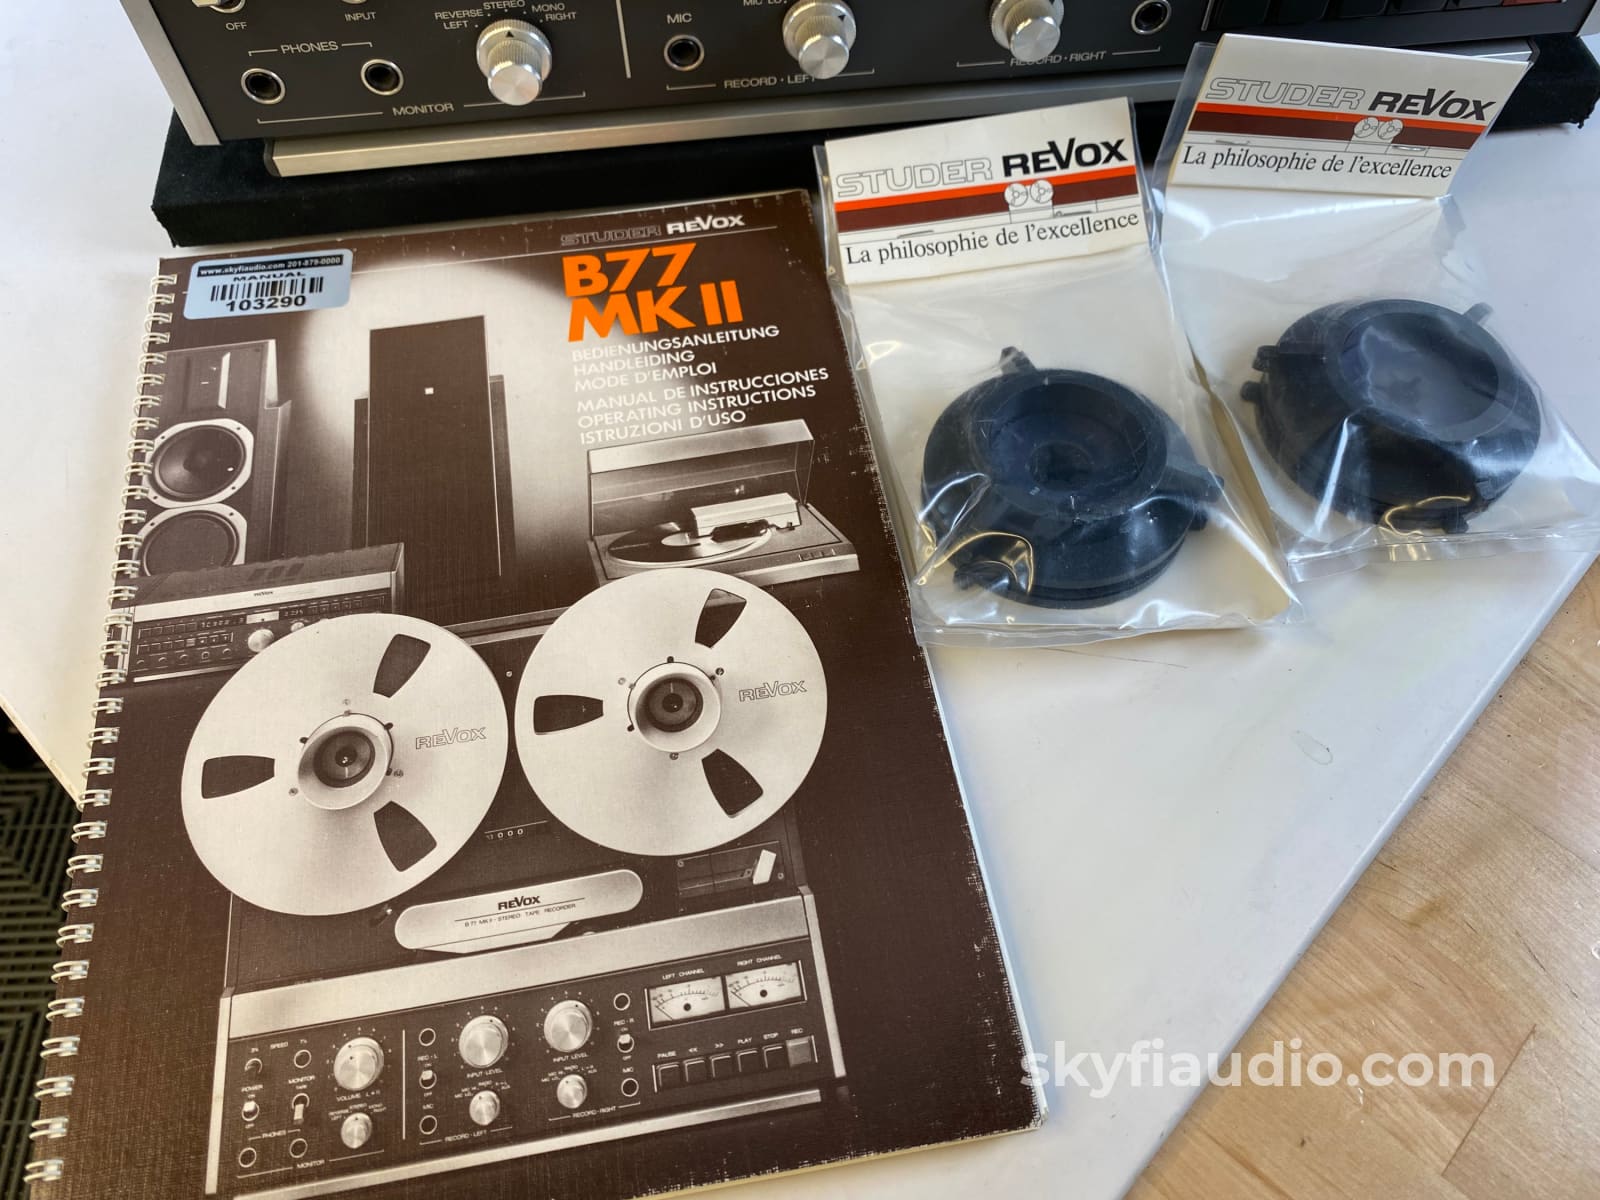 Revox B77 Mkii Reel To Recorder - Complete And Like New Tape Deck